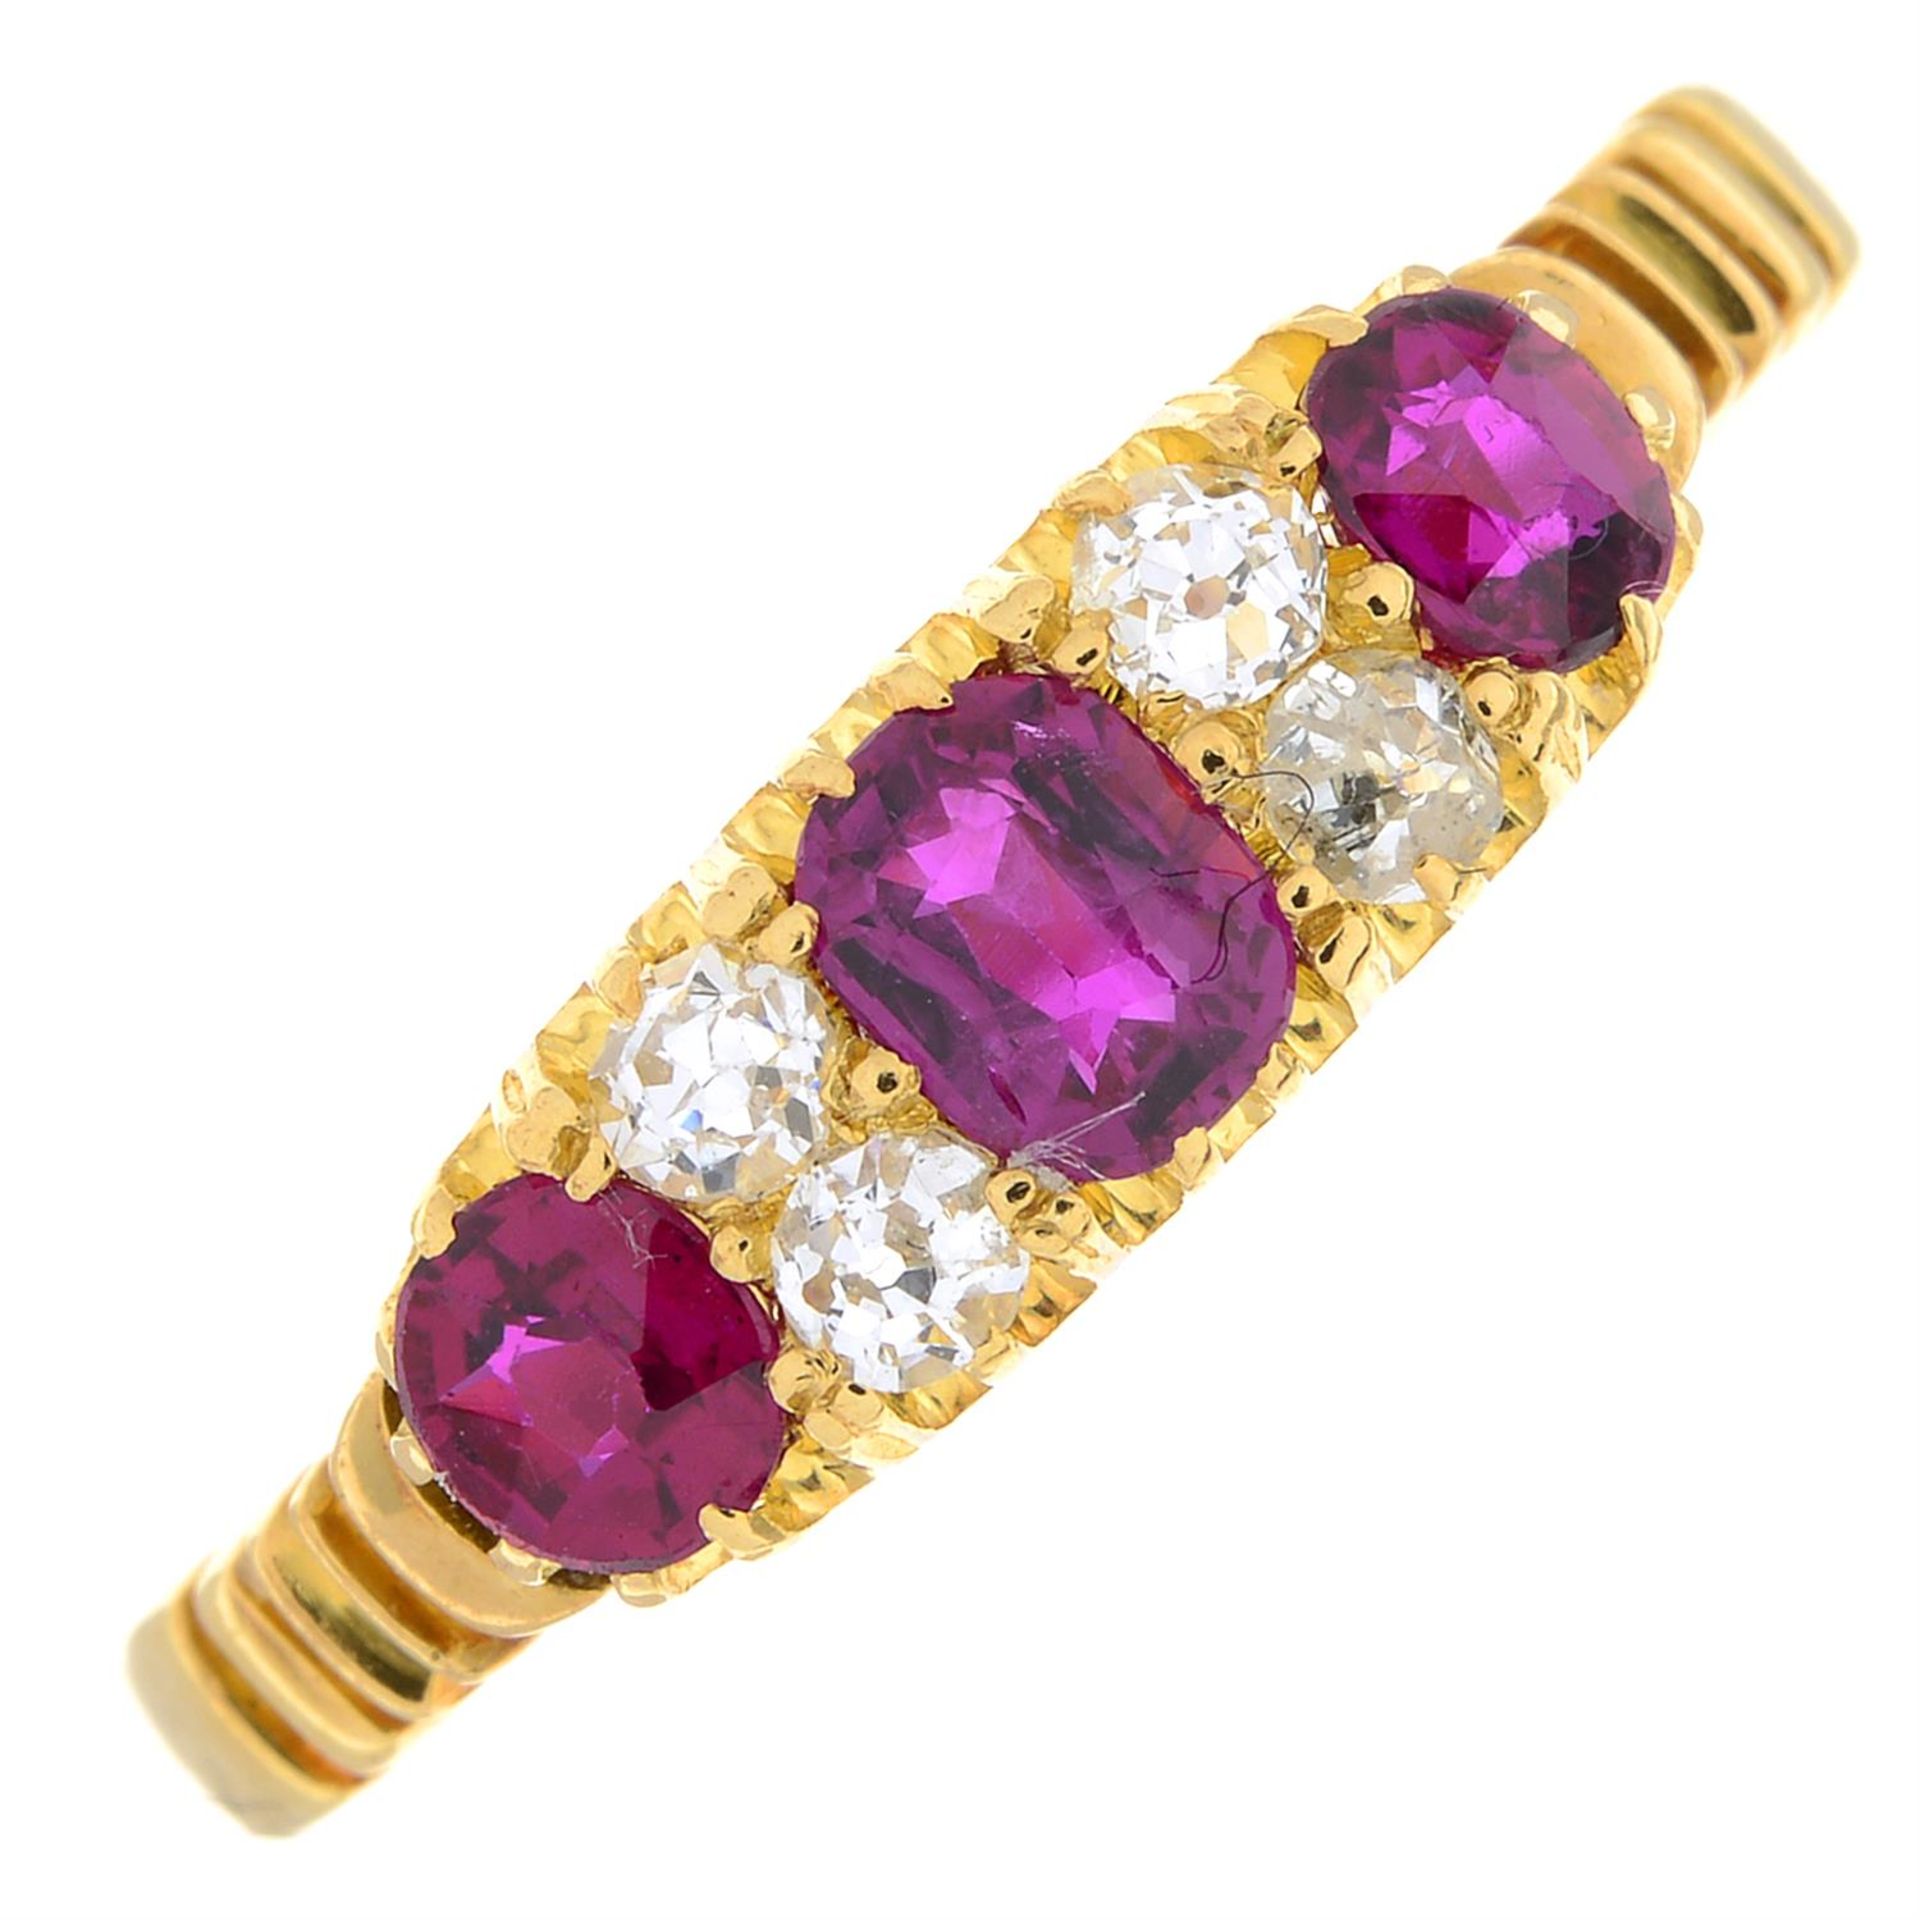 Early 20th c. 18ct gold ruby & diamond ring